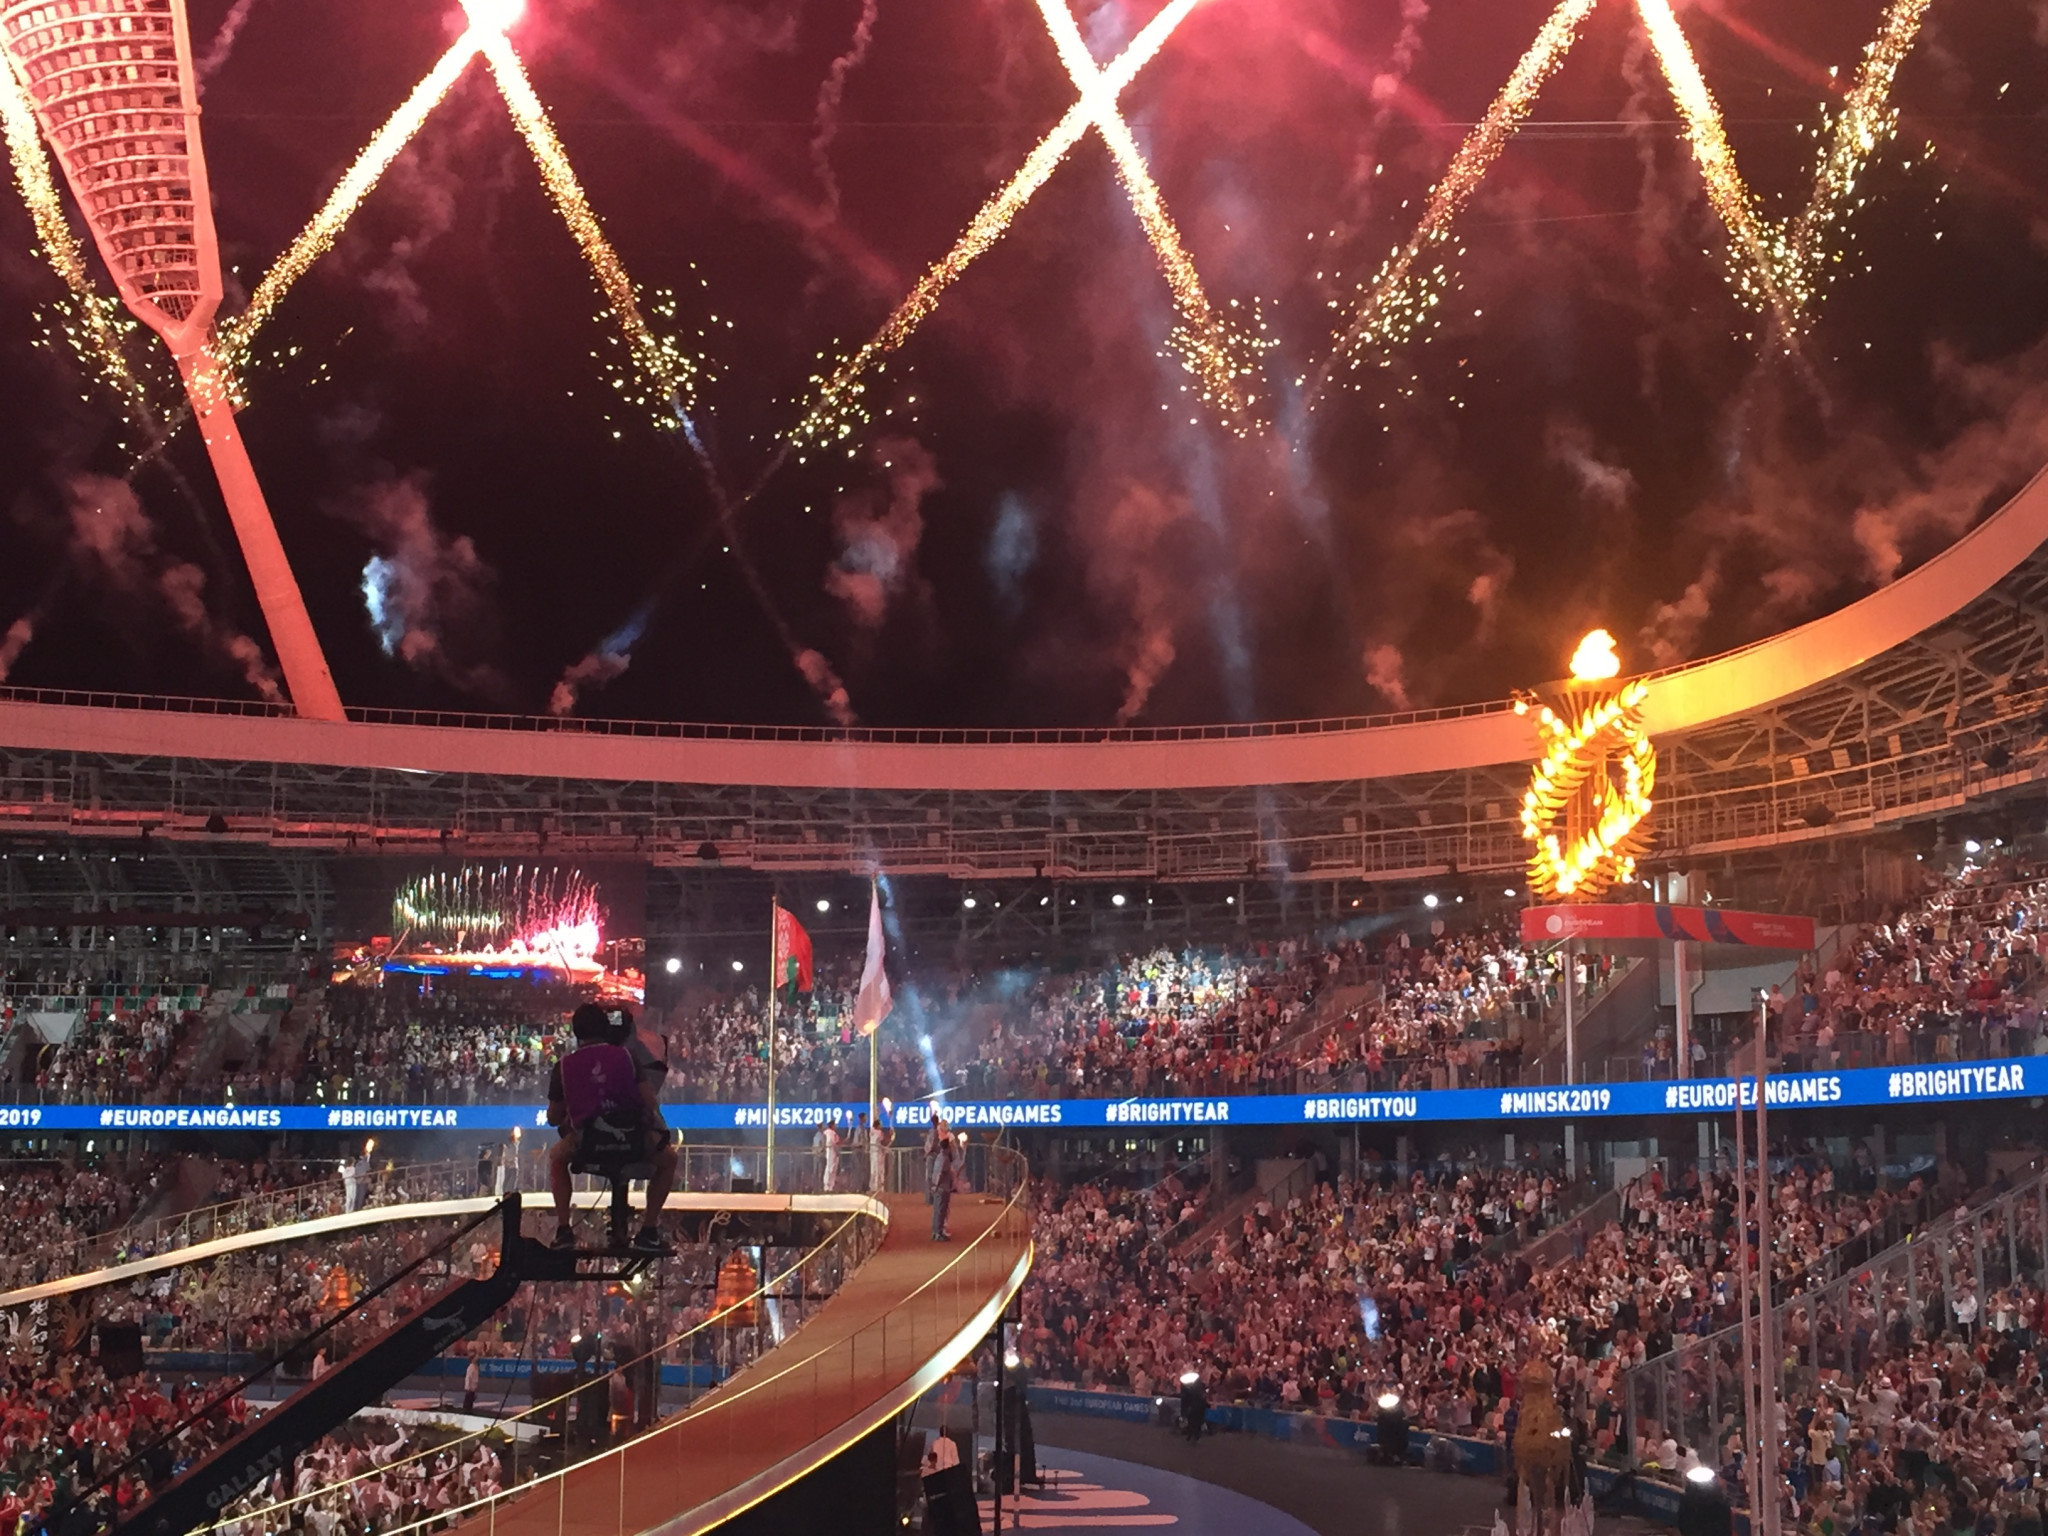 Flame of Peace lit as Minsk 2019 European Games officially begin